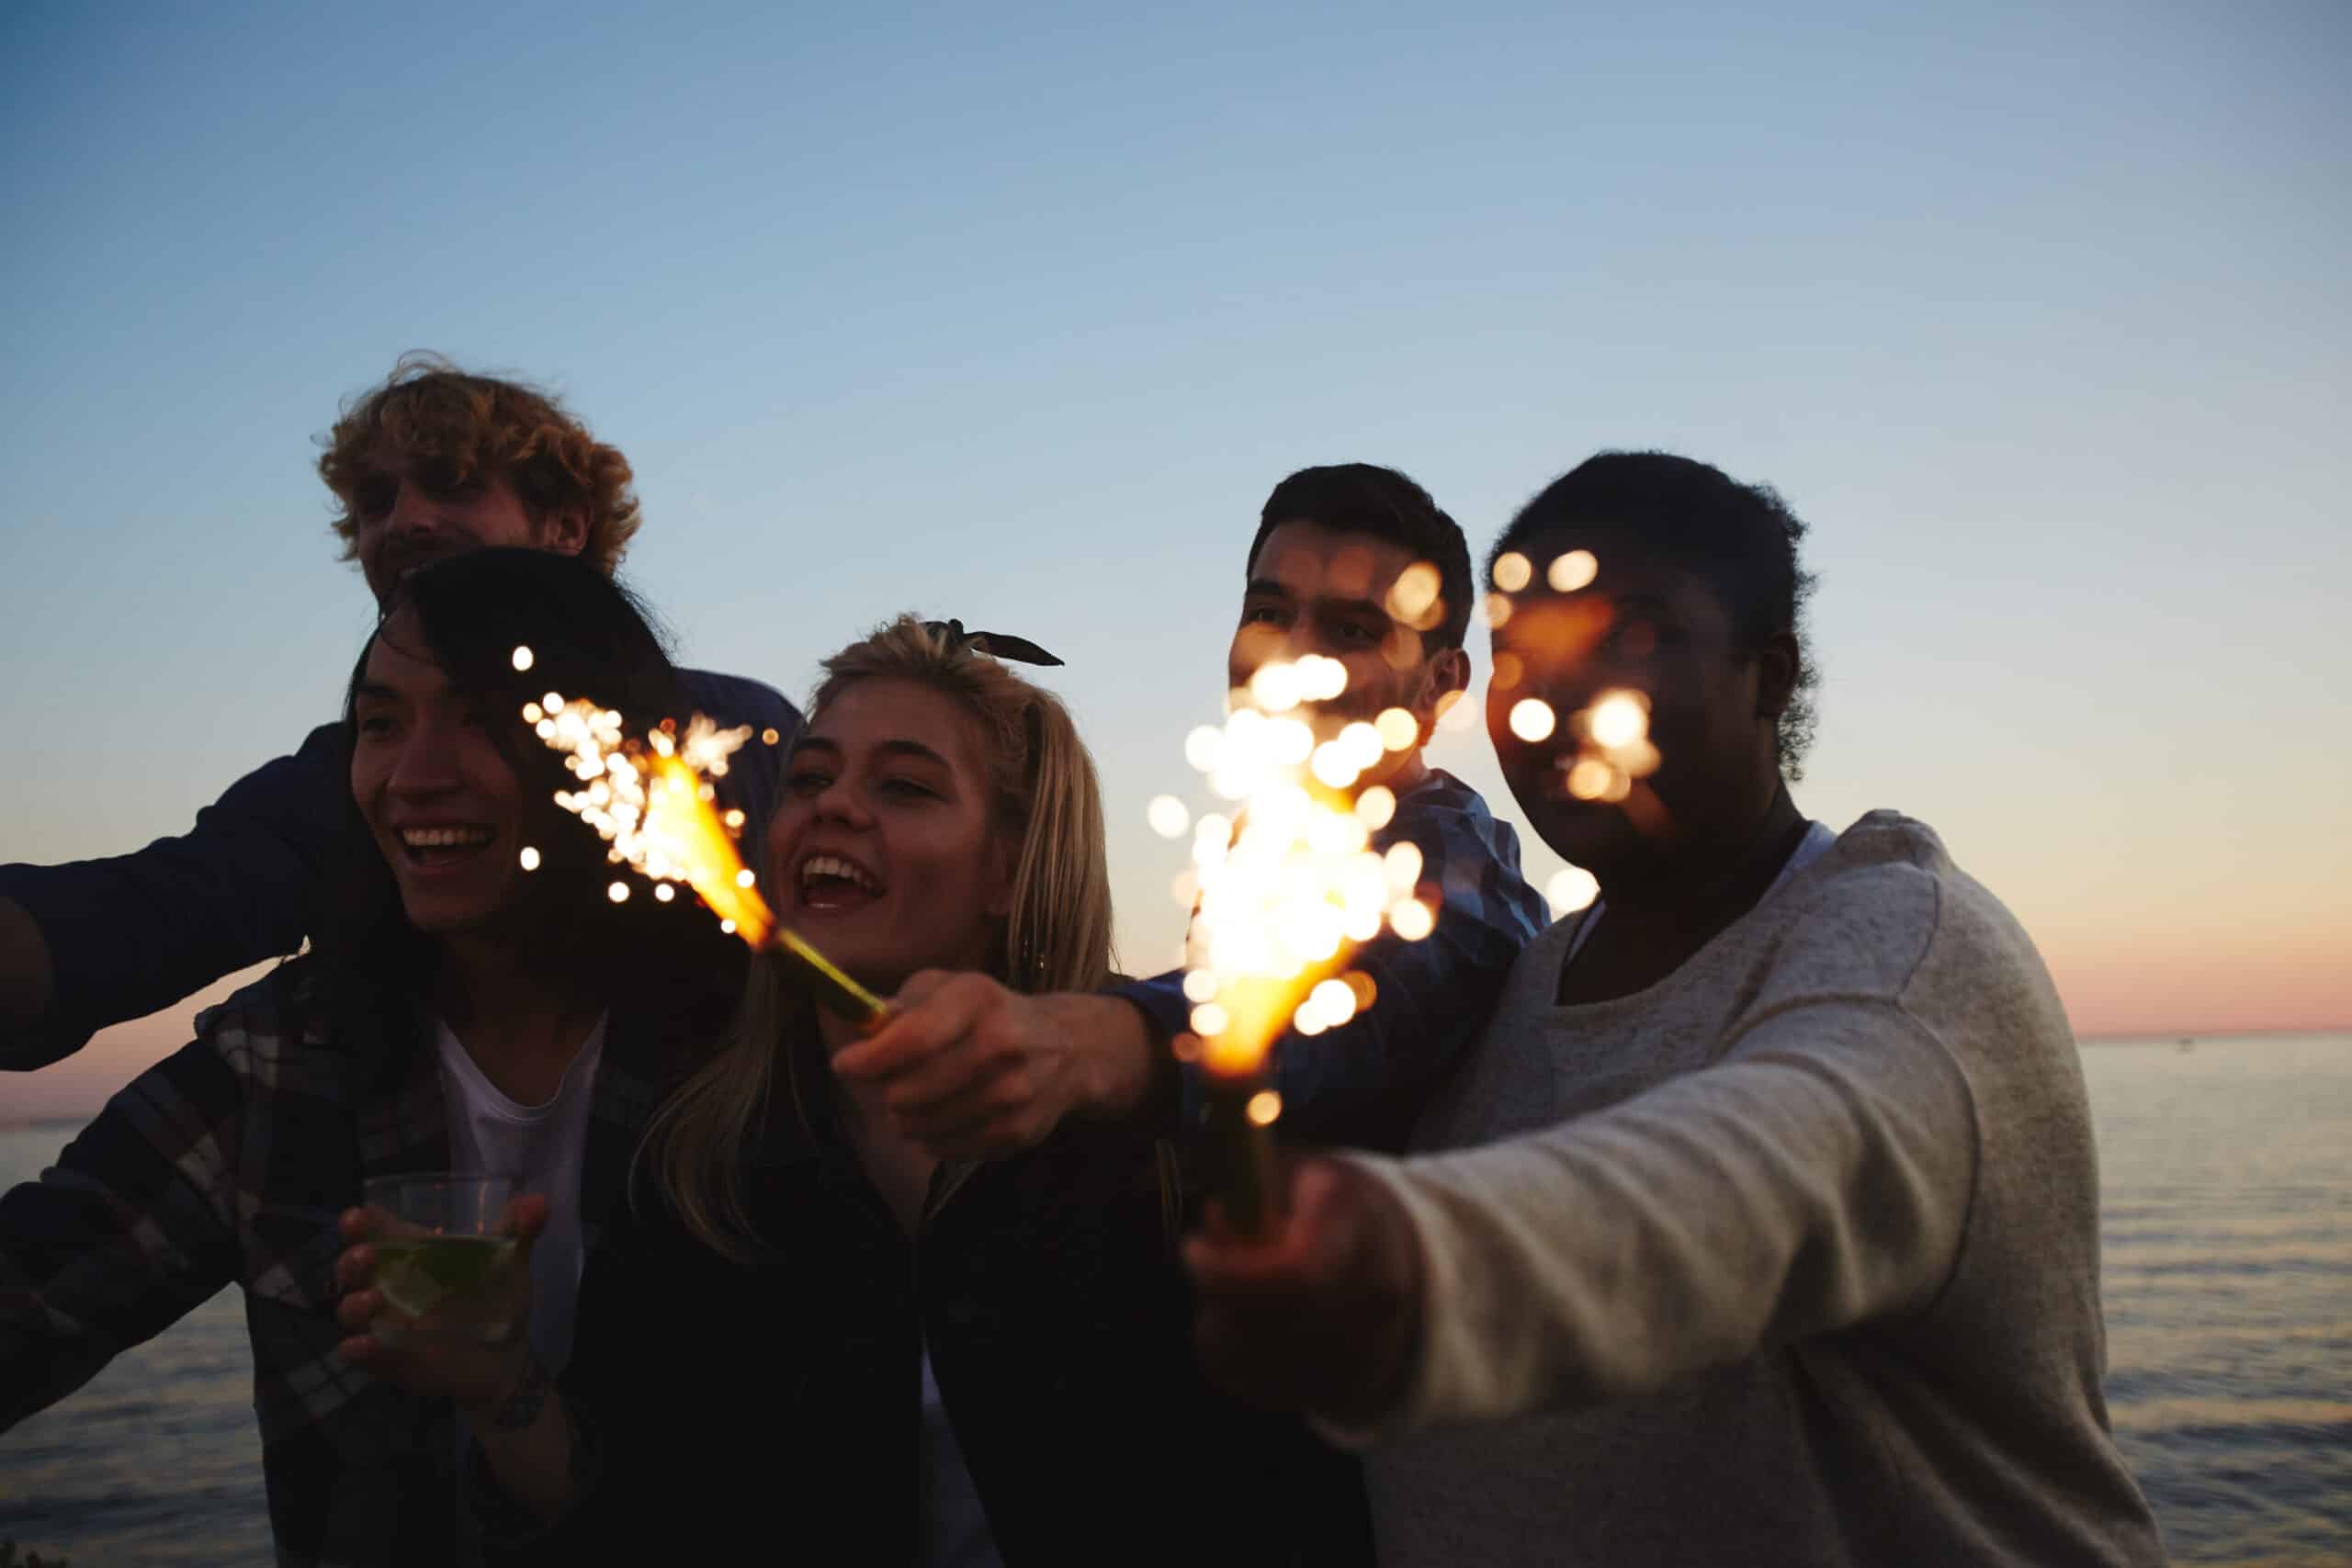 Male and female friends with sparklers lighten using disposable lighters in hands gathered together outdoors and celebrating momentous event, picturesque seascape on background